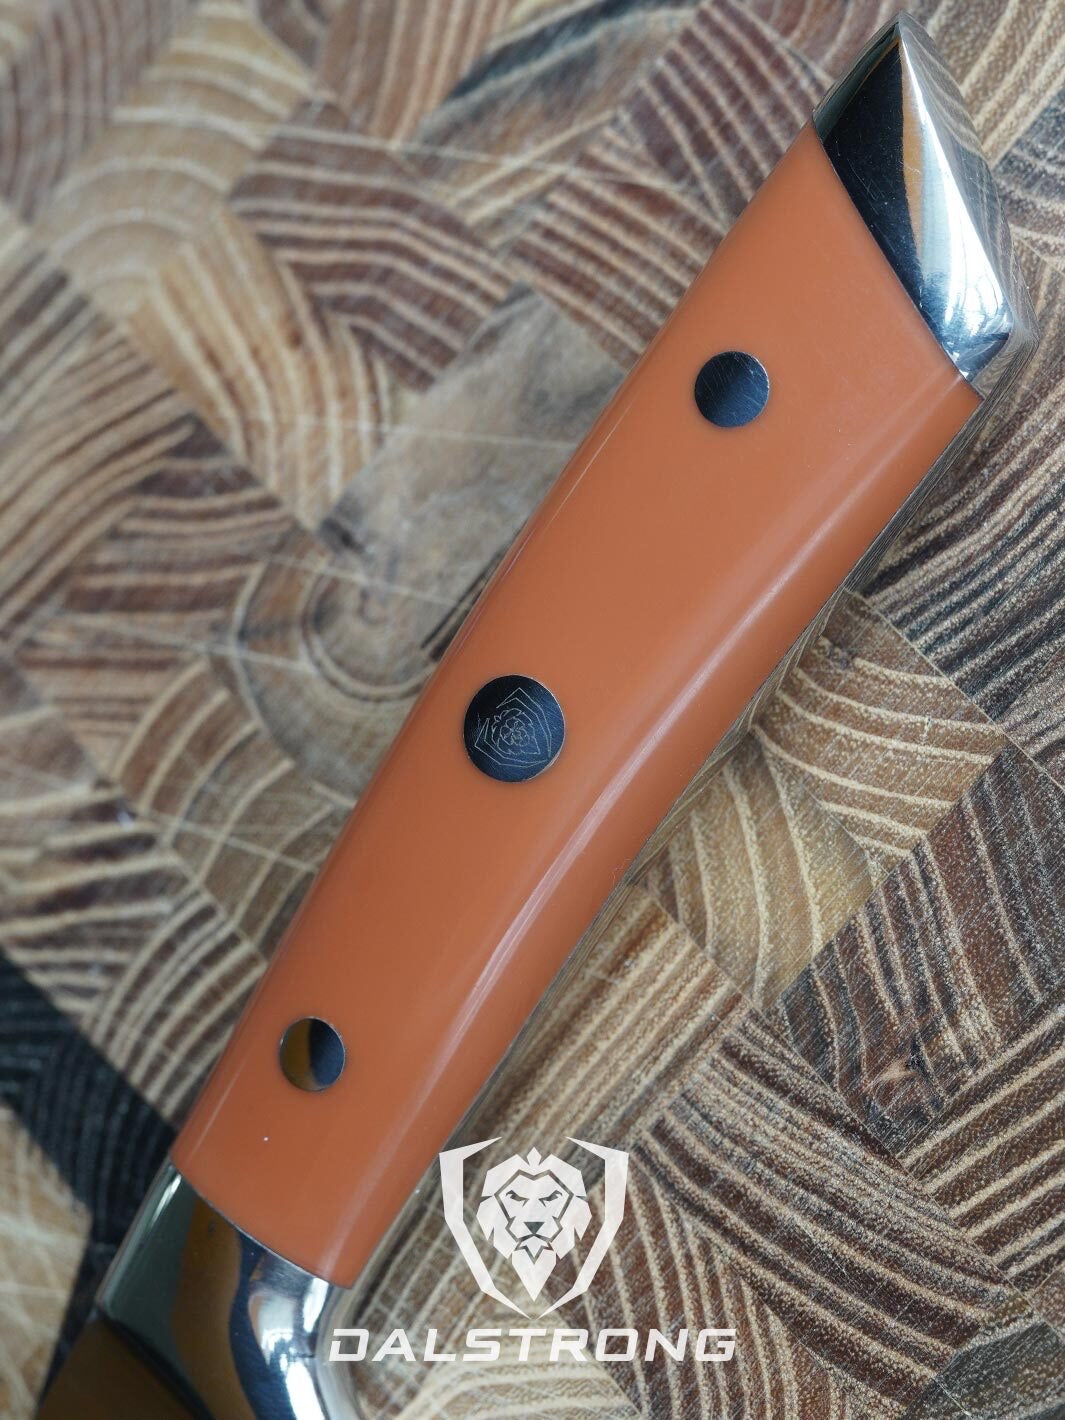 Dalstrong gladiator series 8 inch chef knife showcasing it's ergonomic ABS orange handle and dalstrong logo in the middle.